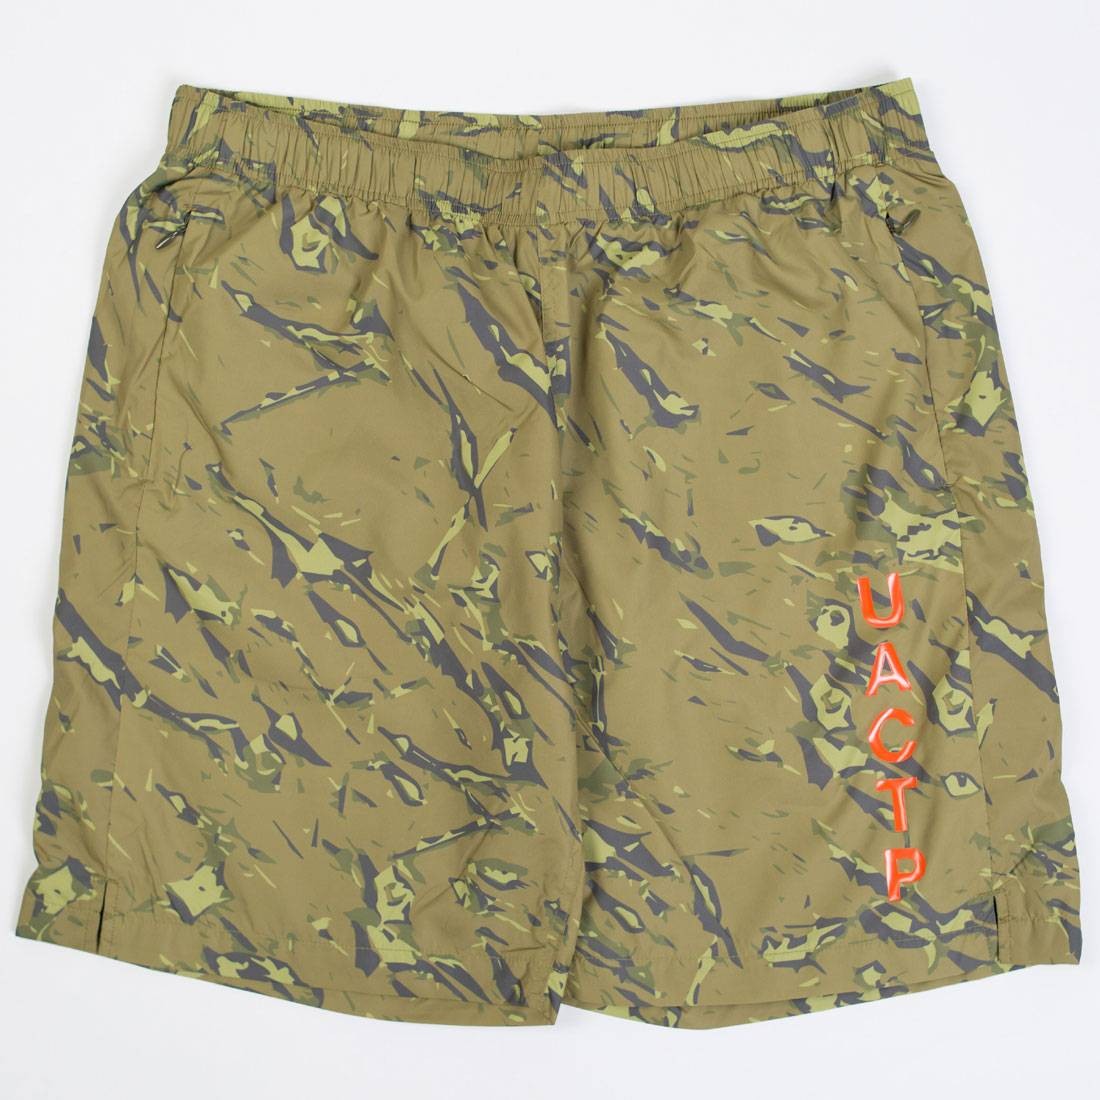 Undefeated Men UACTP 5 Strike Poly Shorts camo